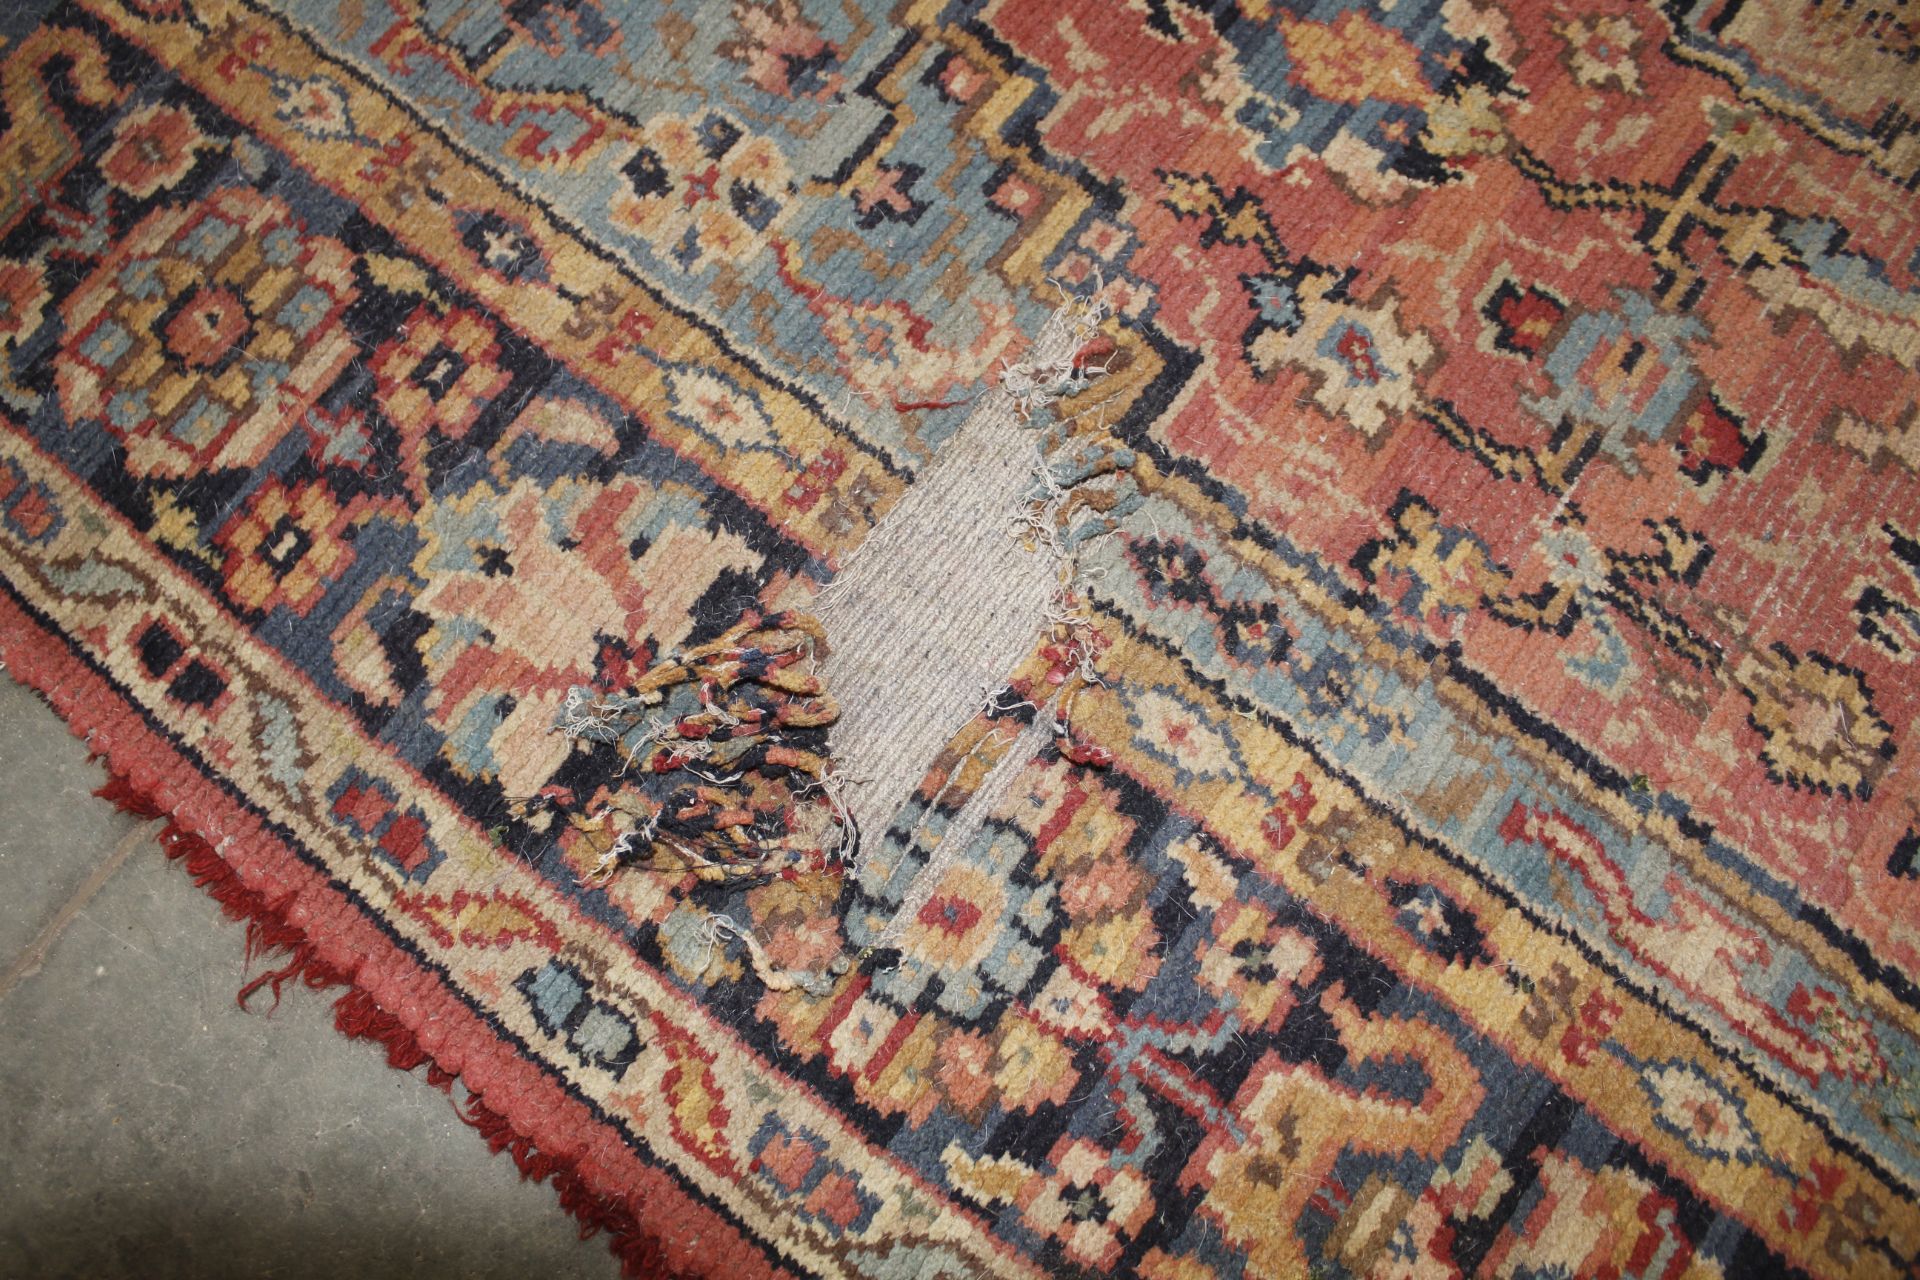 An approx. 10' x 6'3" floral patterned wool rug AF - Image 3 of 5